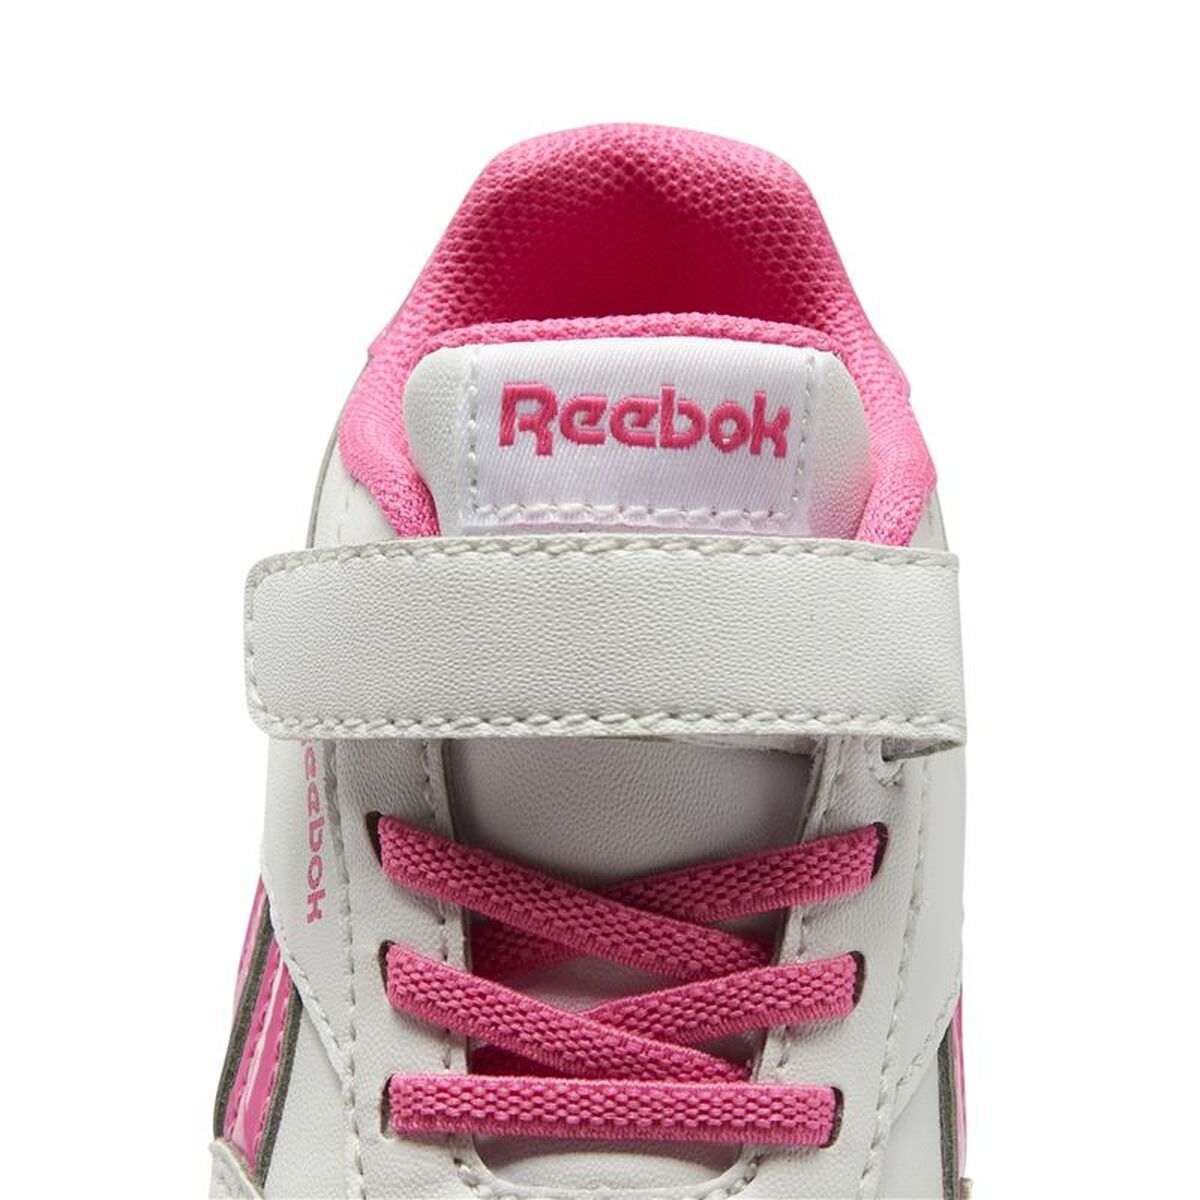 Sports Shoes for Kids Reebok Classic Jogger 3.0 Pink